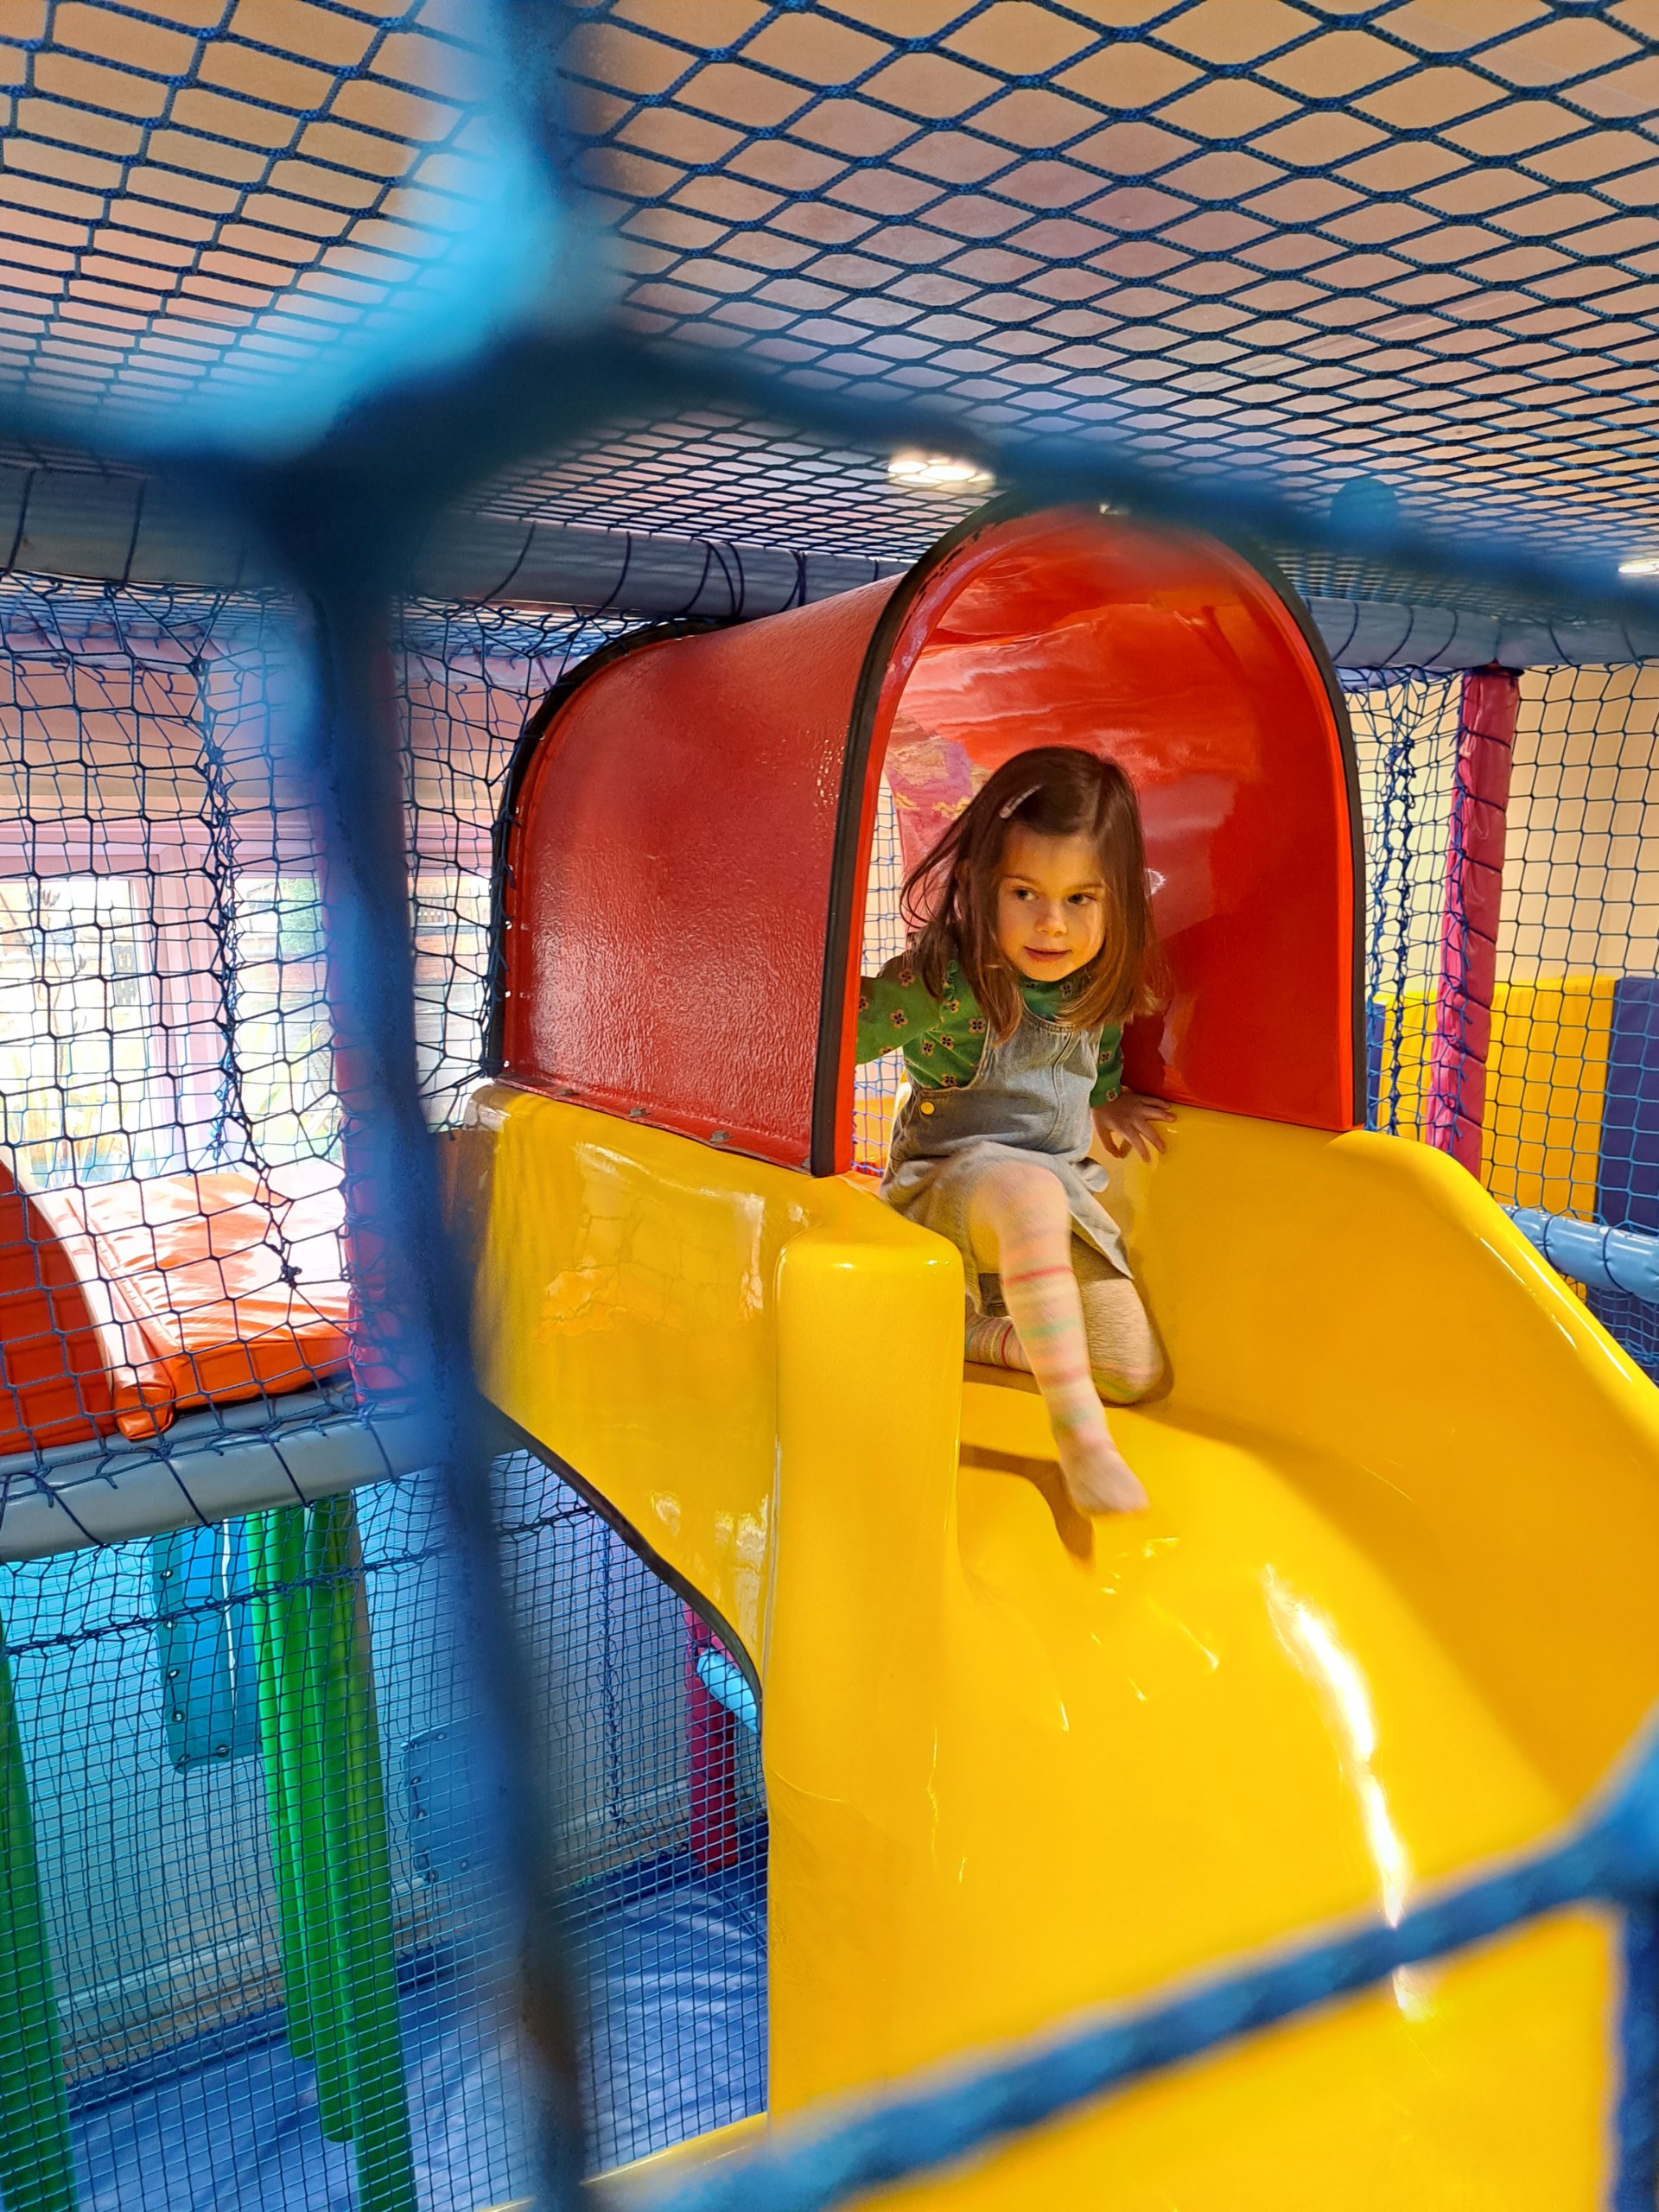 Little girl ready to slide down the big yellow soft play slide.